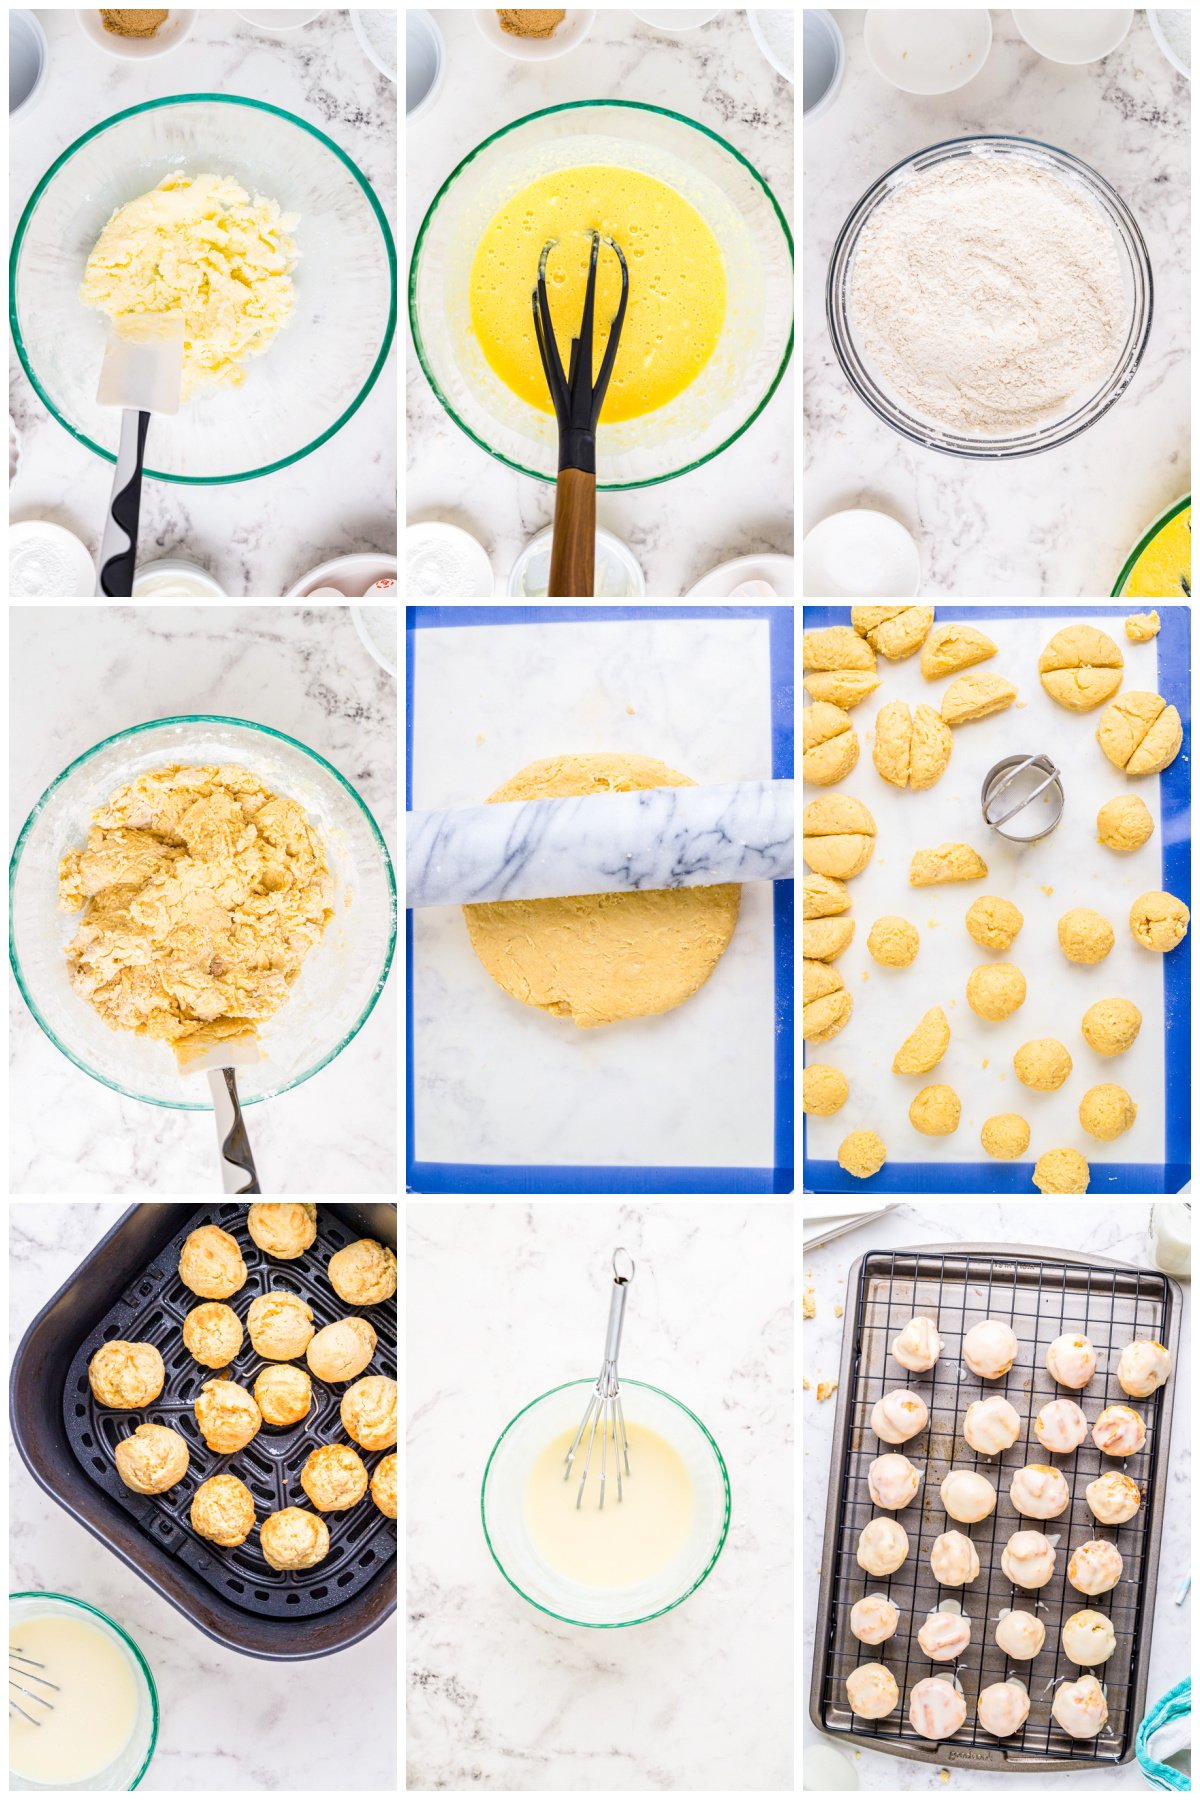 Step by step photos on how to make Munchkins